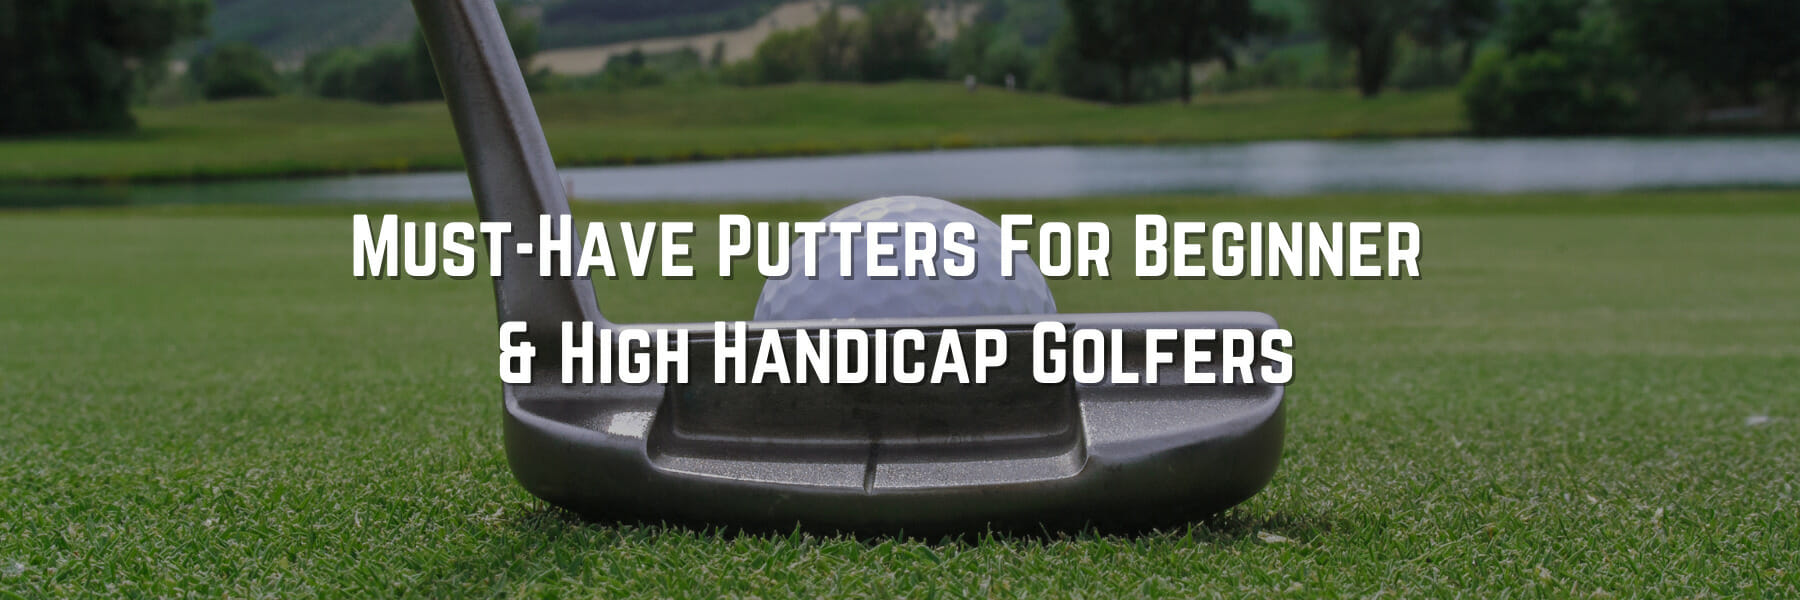 Must-Have Putters For Beginner and High Handicap Golfers